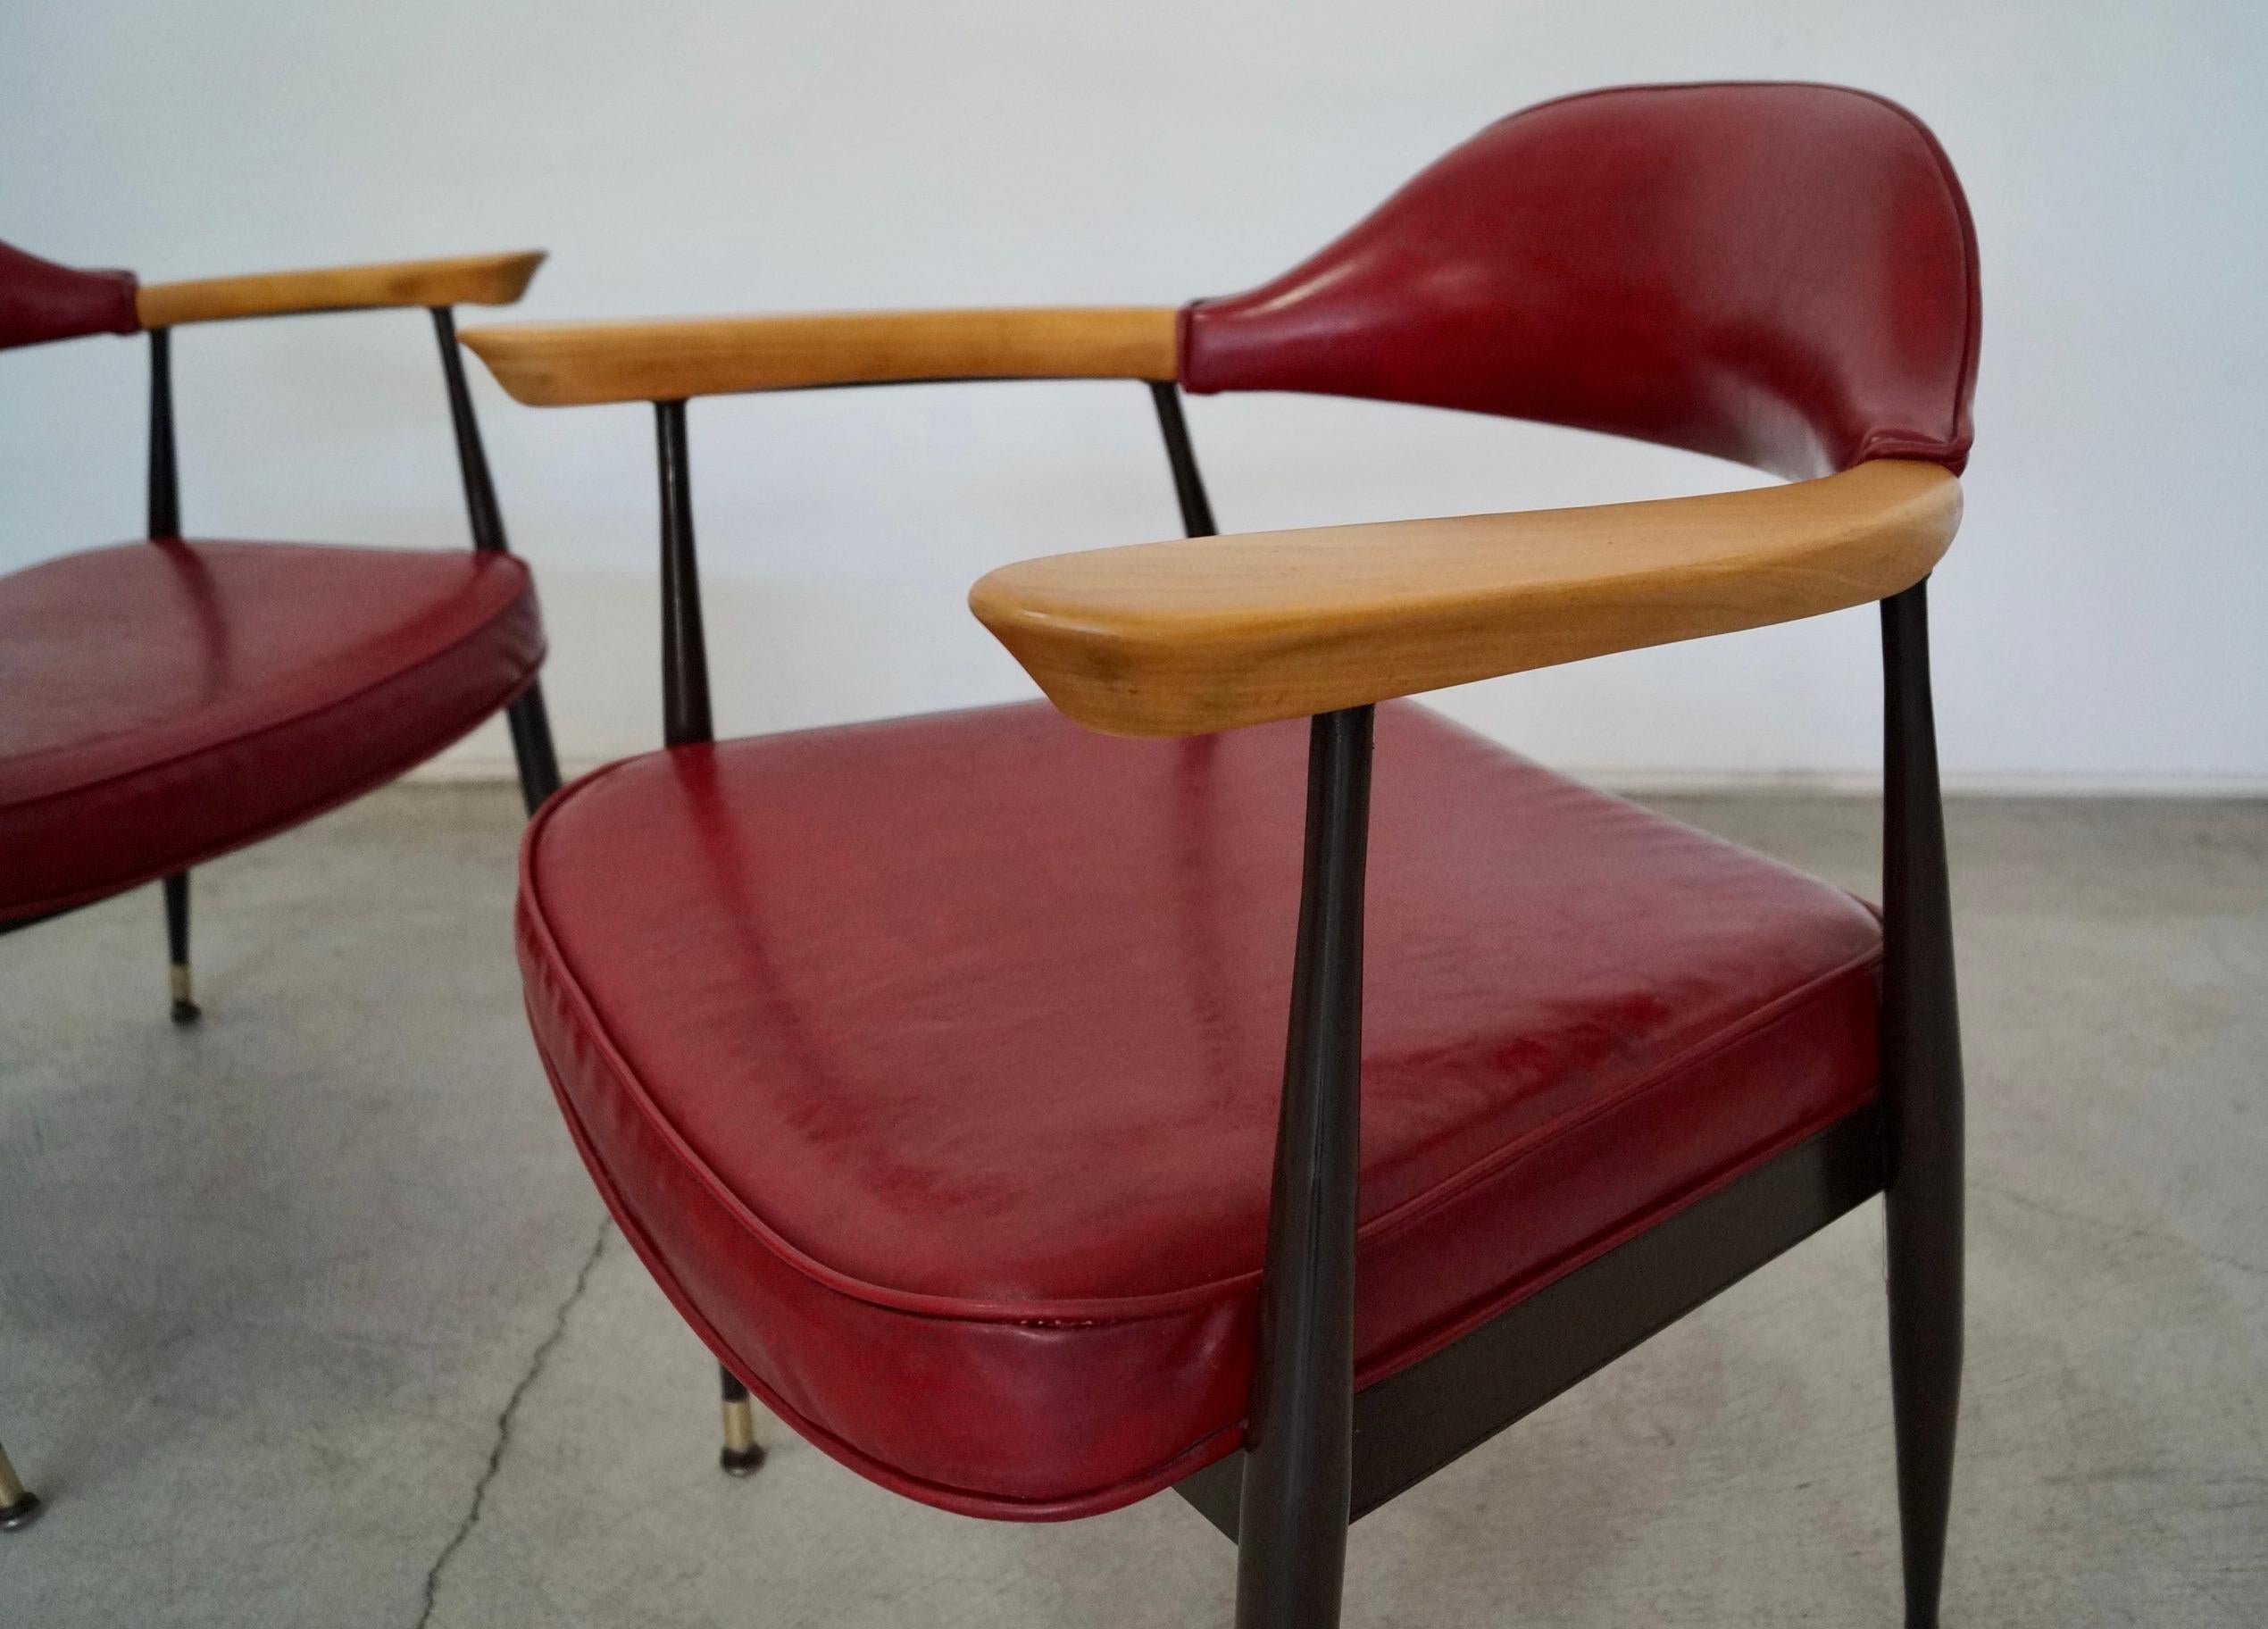 1970's Mid-Century Modern Metal & Wood Armchairs - a Pair For Sale 8